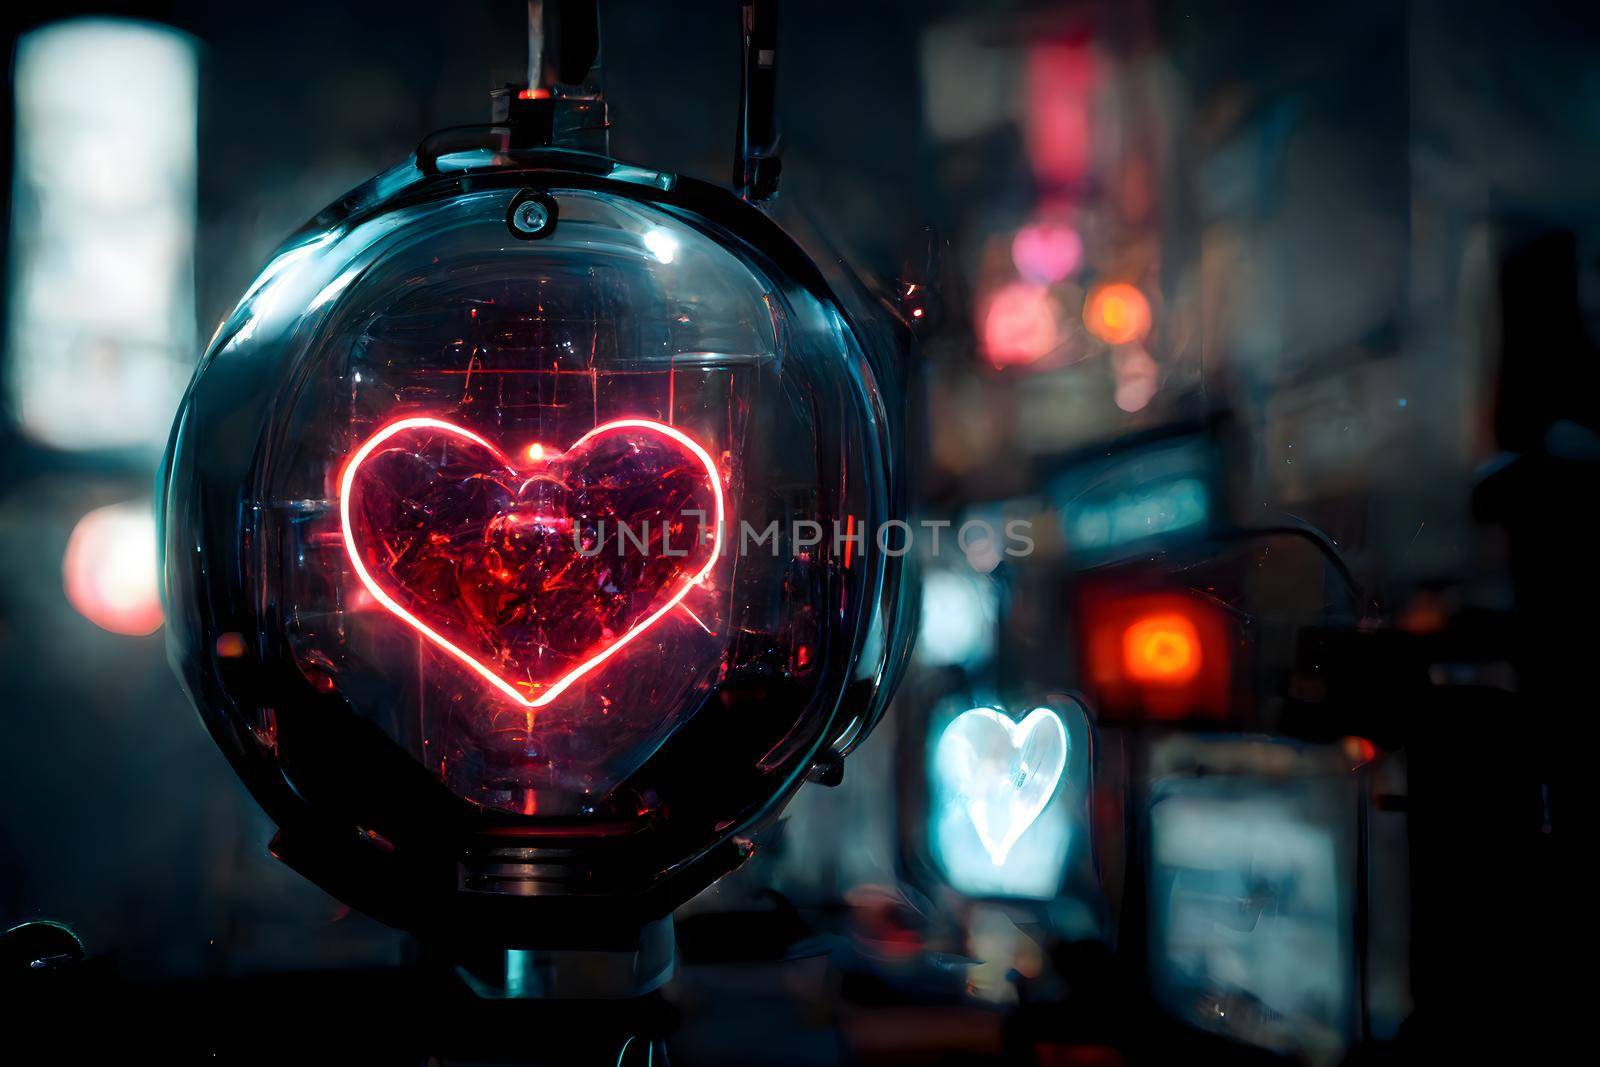 cyberpunk neon shiny and glowing hearts on gray background, neural network generated art for valentines day. Digitally generated painting-like image. Not based on any actual scene or pattern.